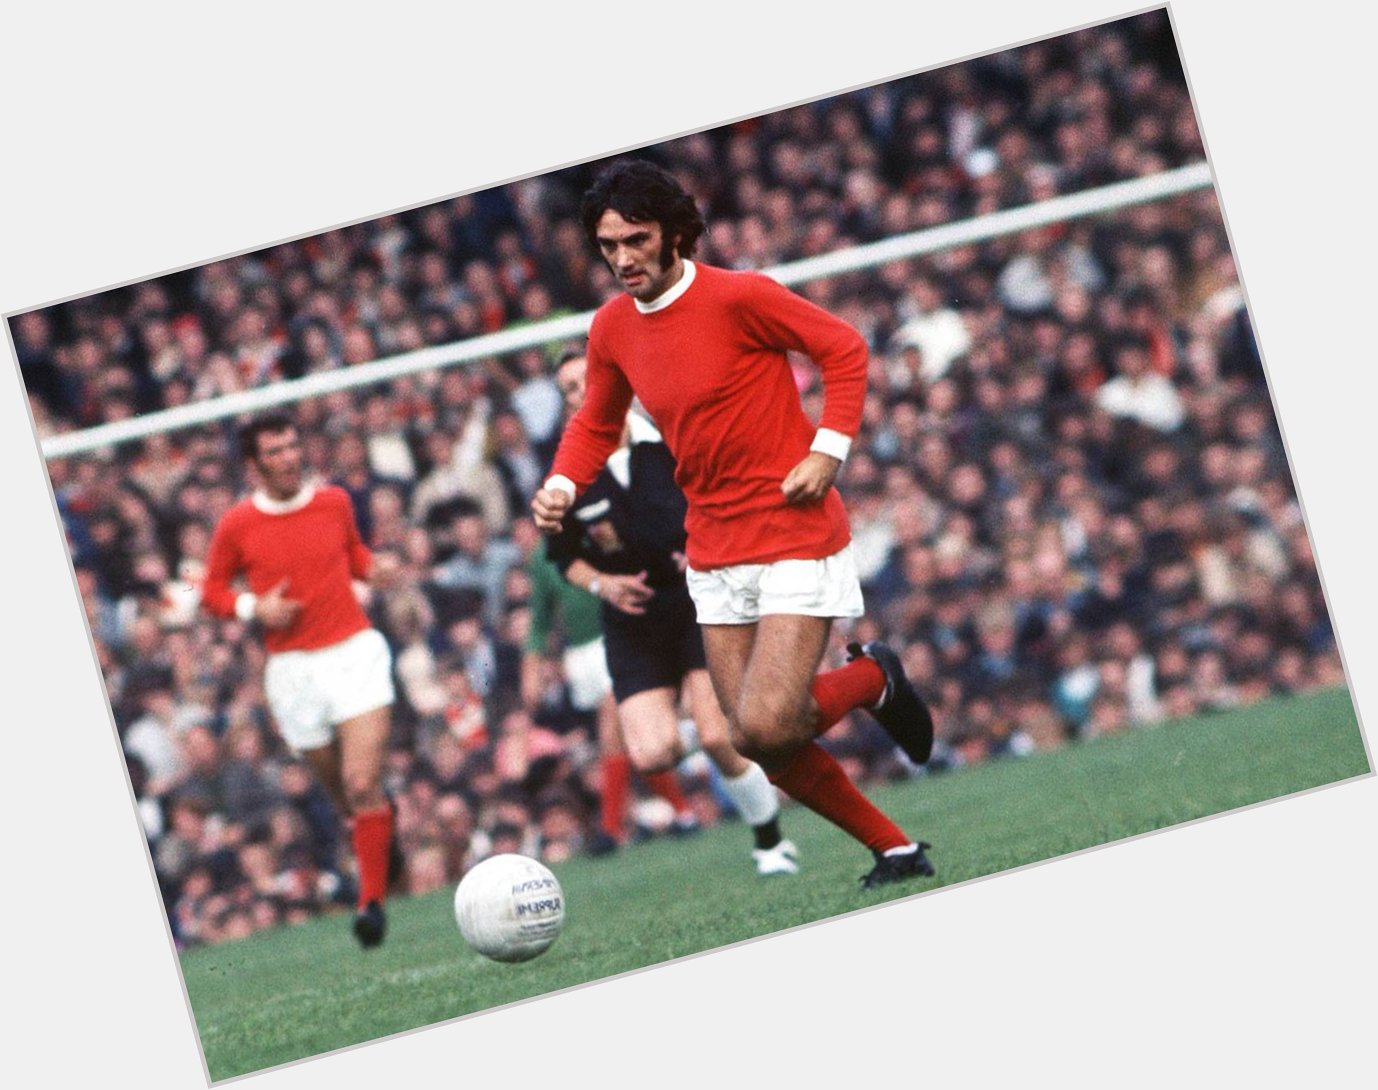 Pele great
Maradona better
George Best

Happy birthday to legend George Best, who would\ve turned 73 today  